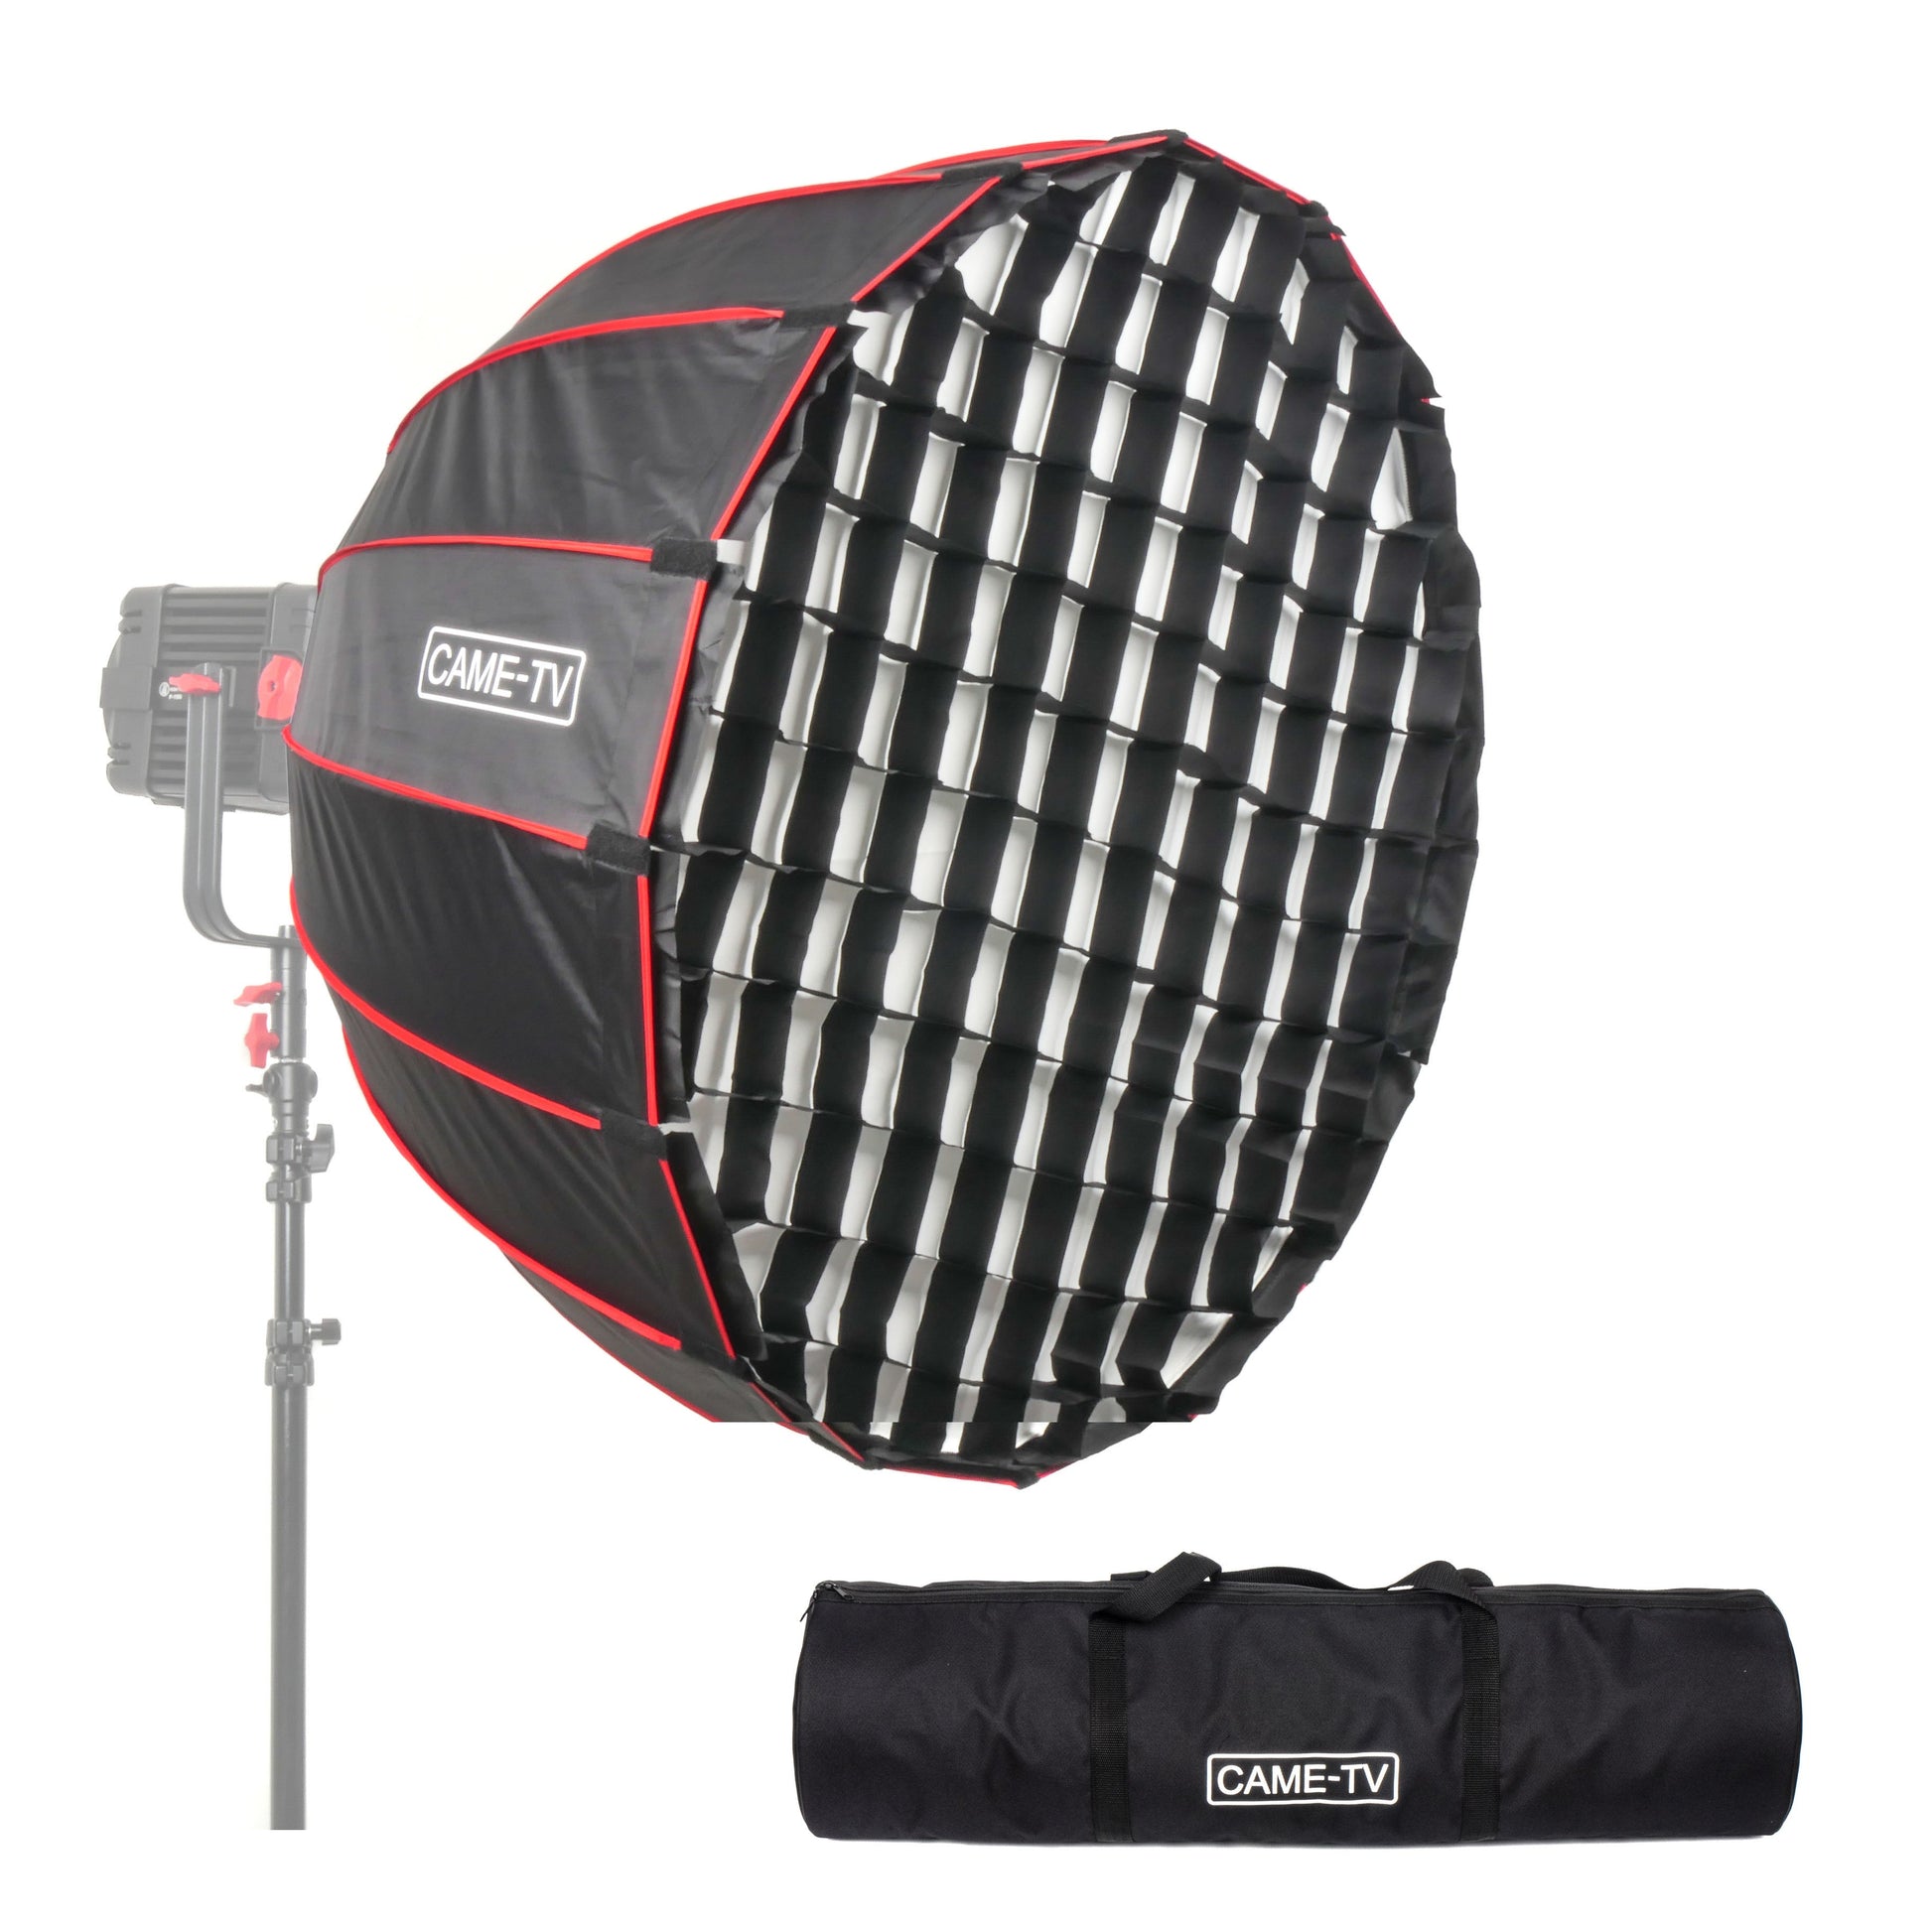 CAME-TV Boltzen 150w MKII Travel Kits Fresnel Focusable LED Bi-Color 30900 Lux@1m - CAME-TV